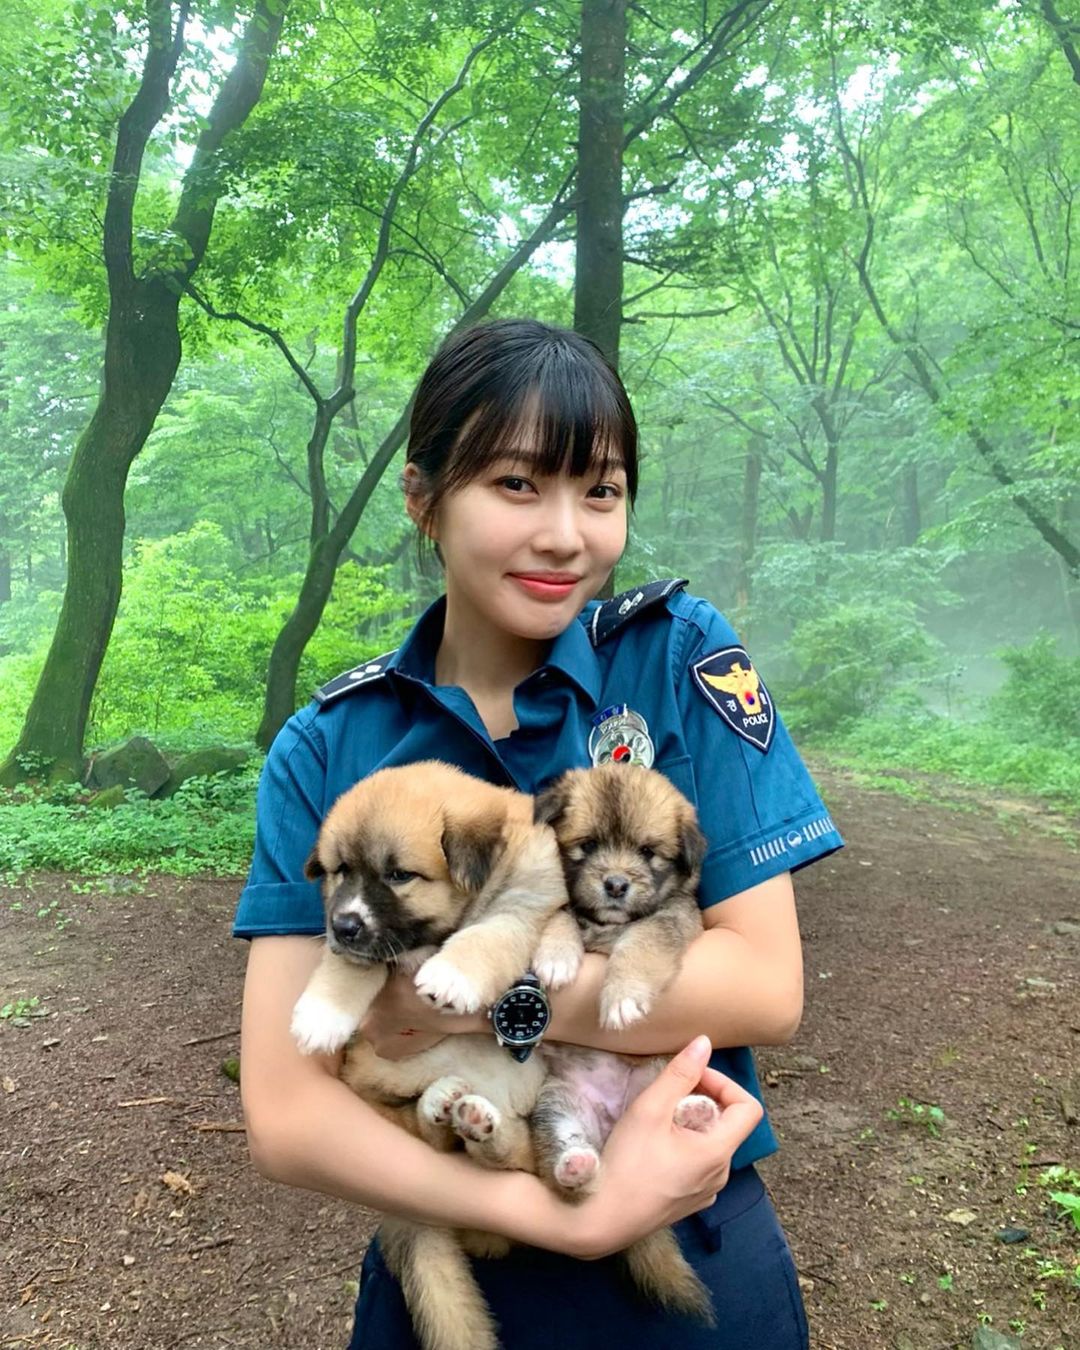 Joy, two puppies and cute appeal